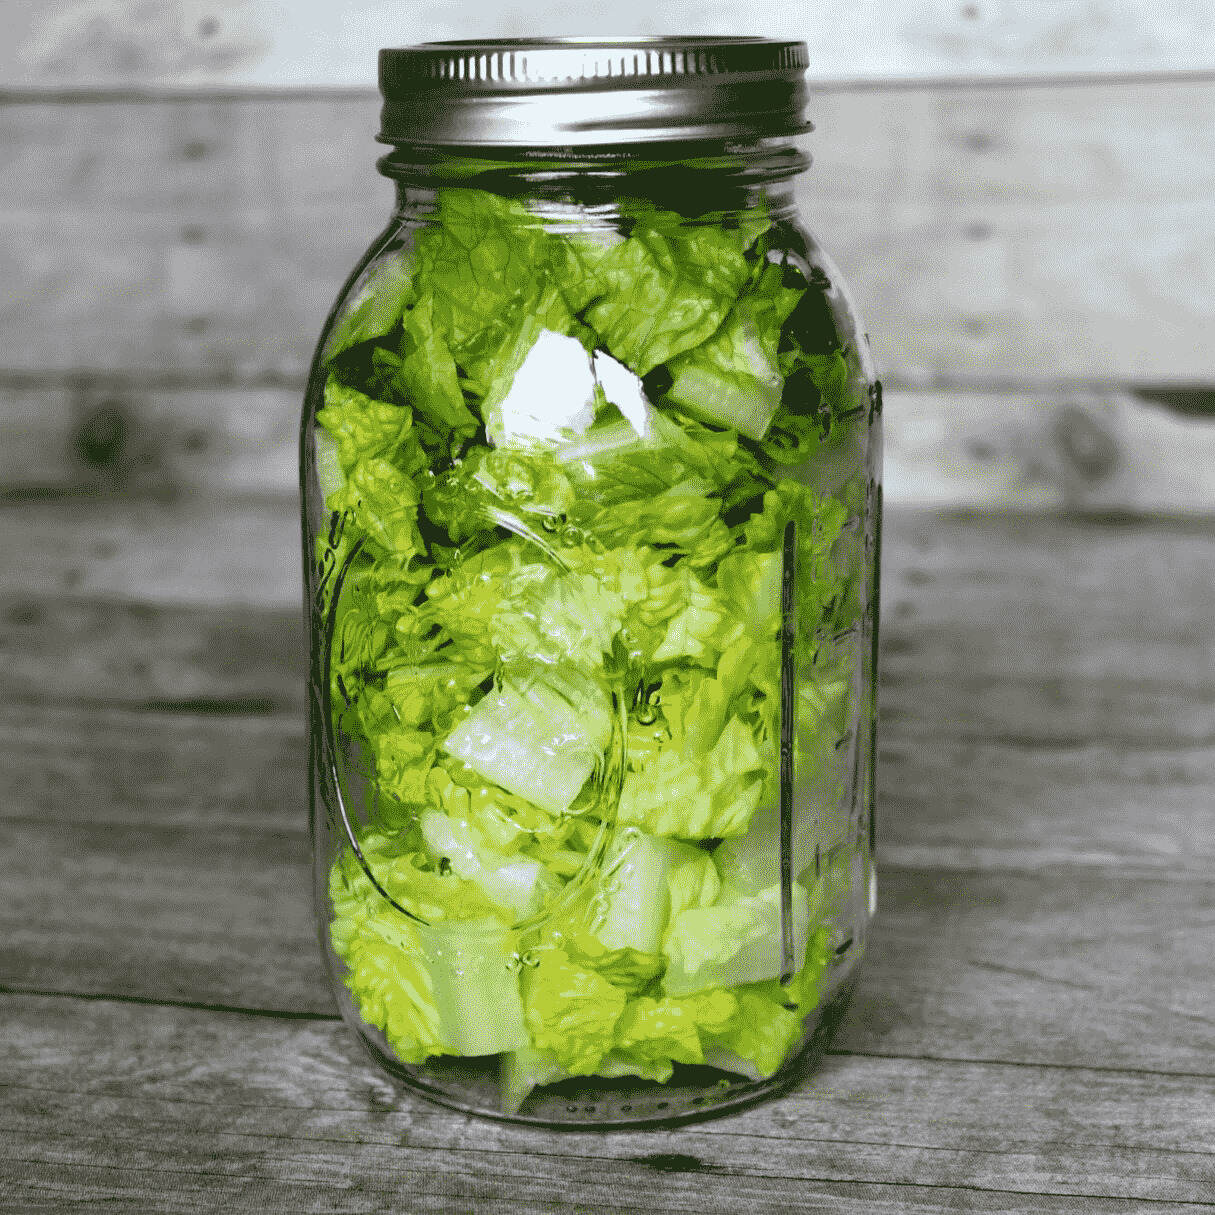 How To Store Lettuce In Mason Jars